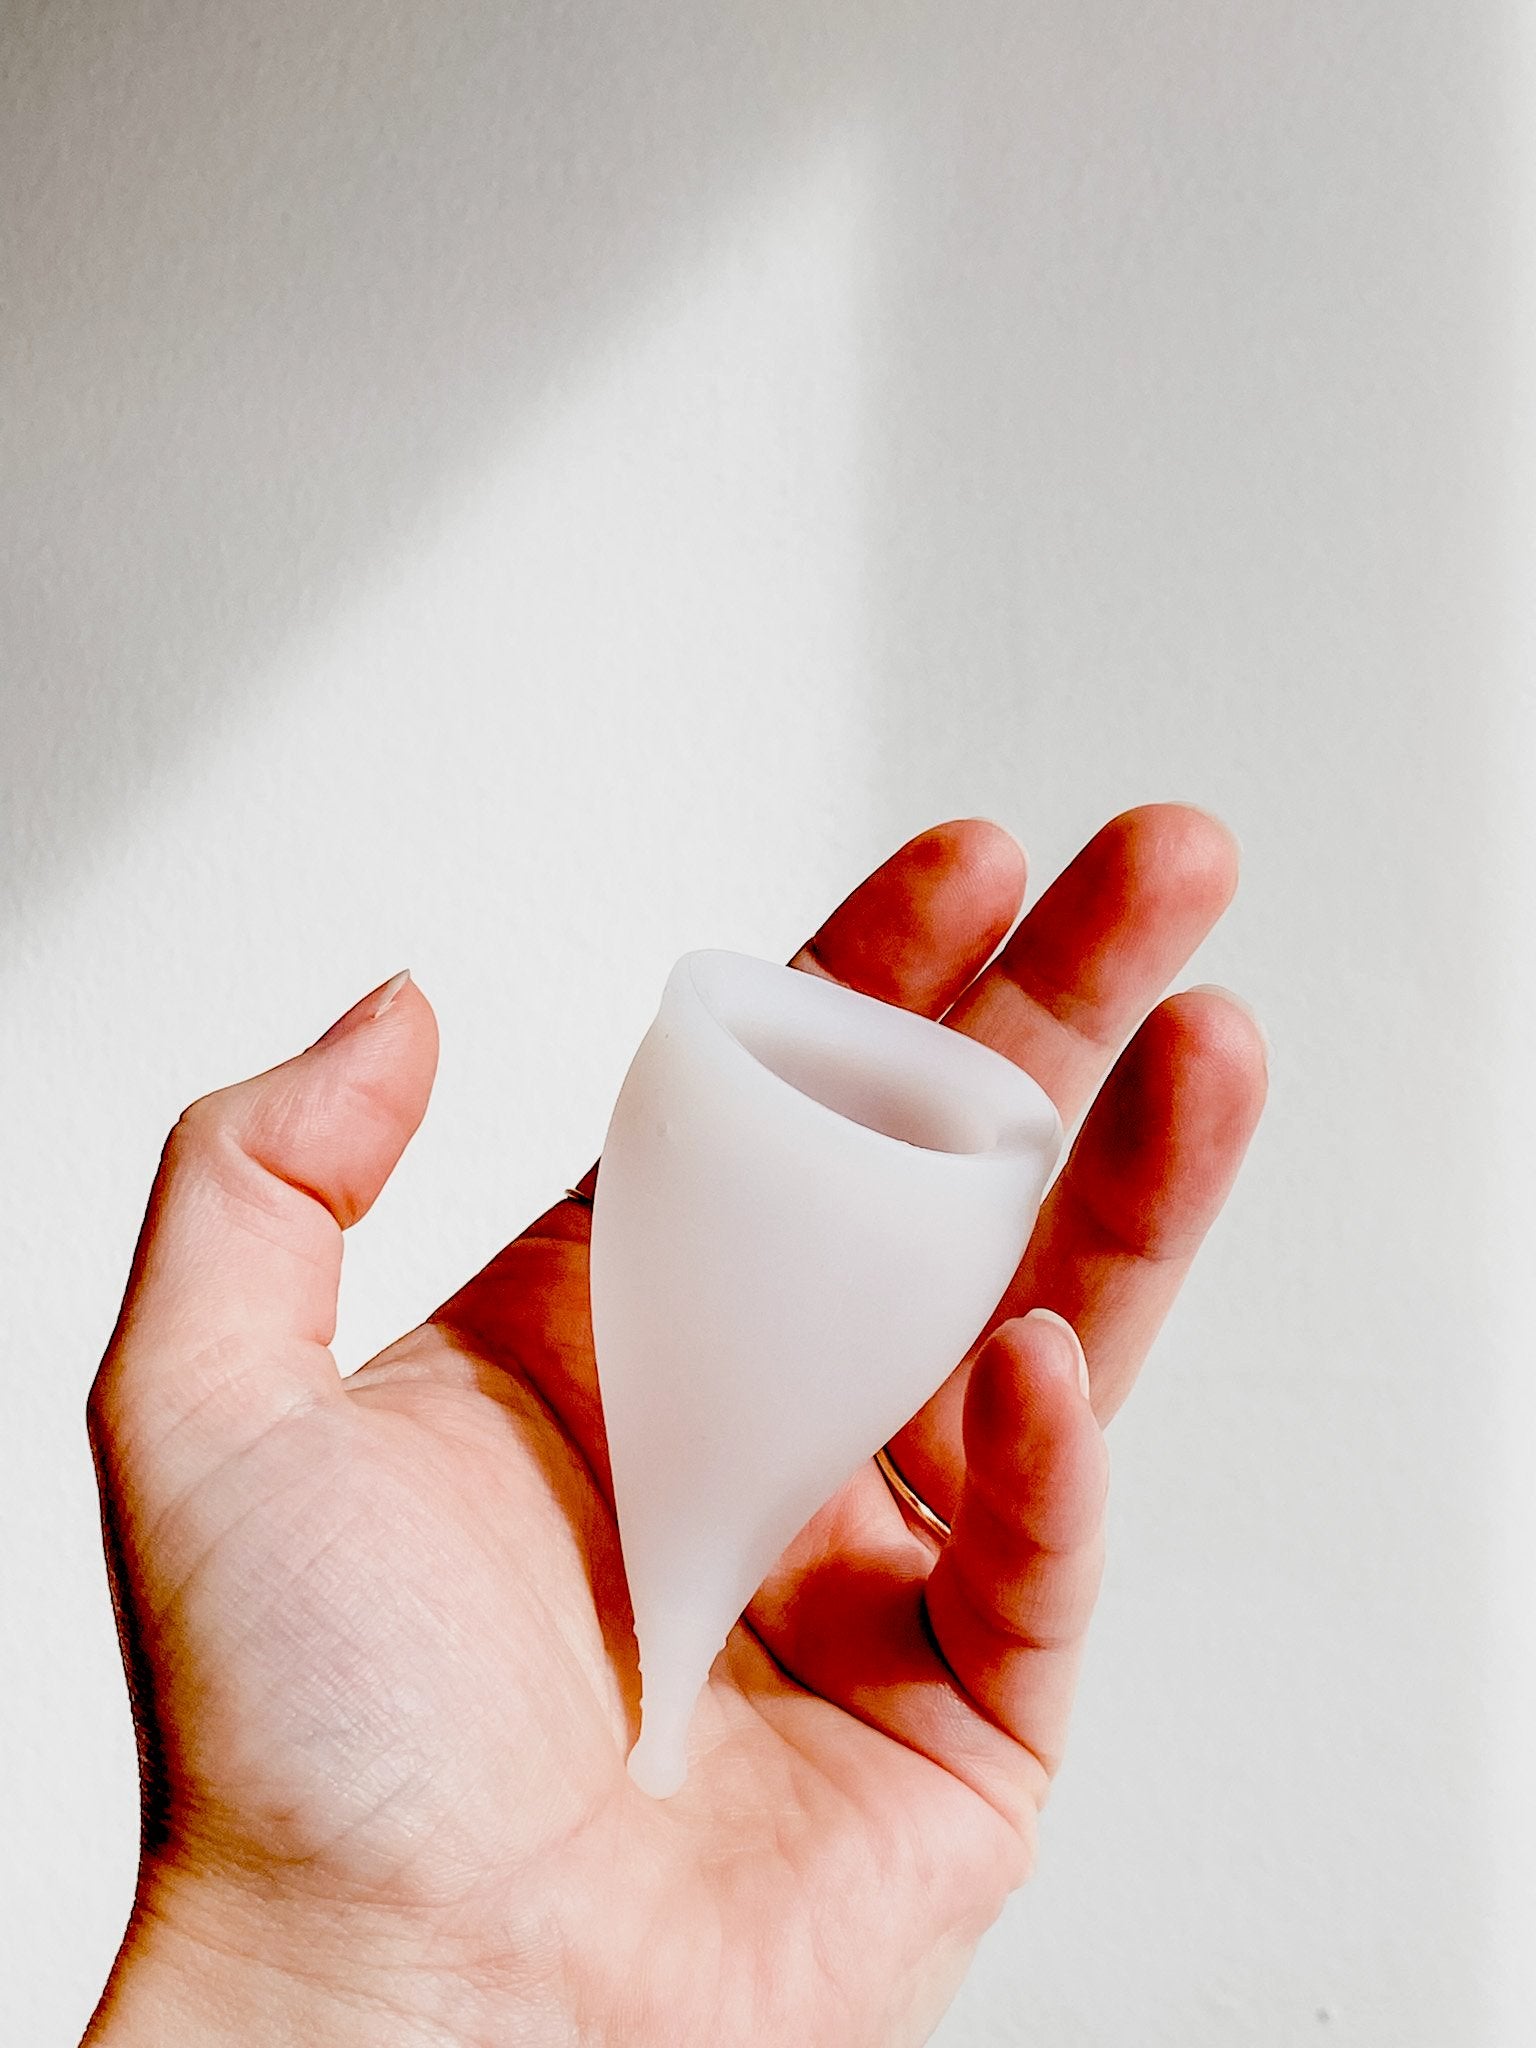 The Monthly Menstrual Cup - Handmade with Natural Ingredients. Hidden Forest Naturals